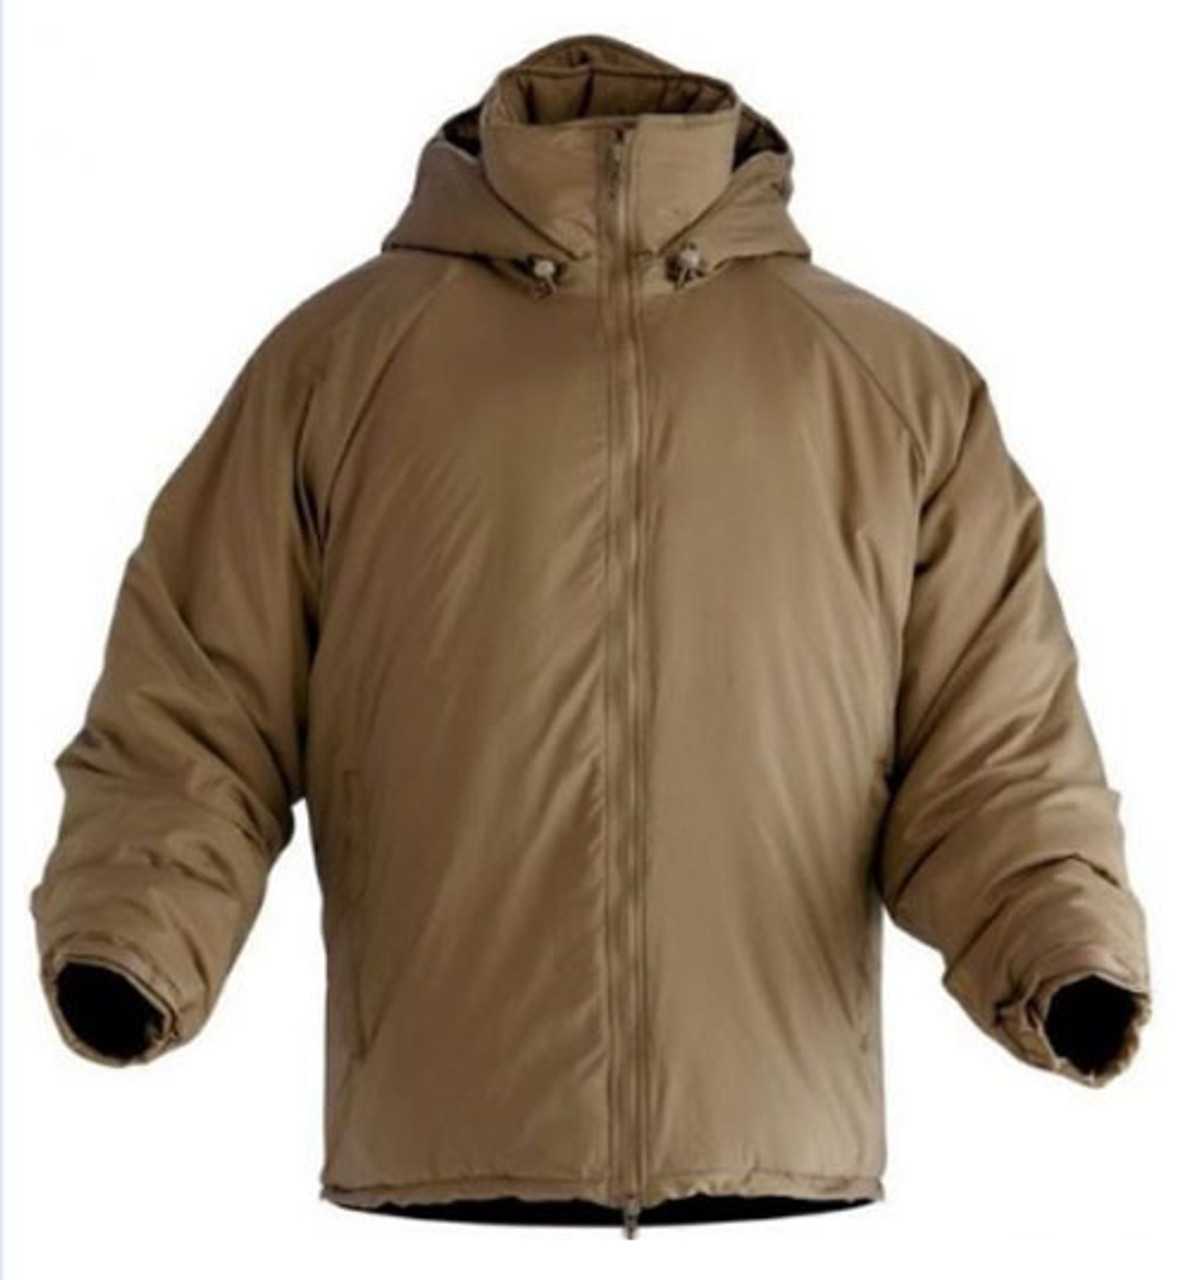 Wild Things Tactical High Loft Jacket SO 2.0 Coyote Brown GORE® 